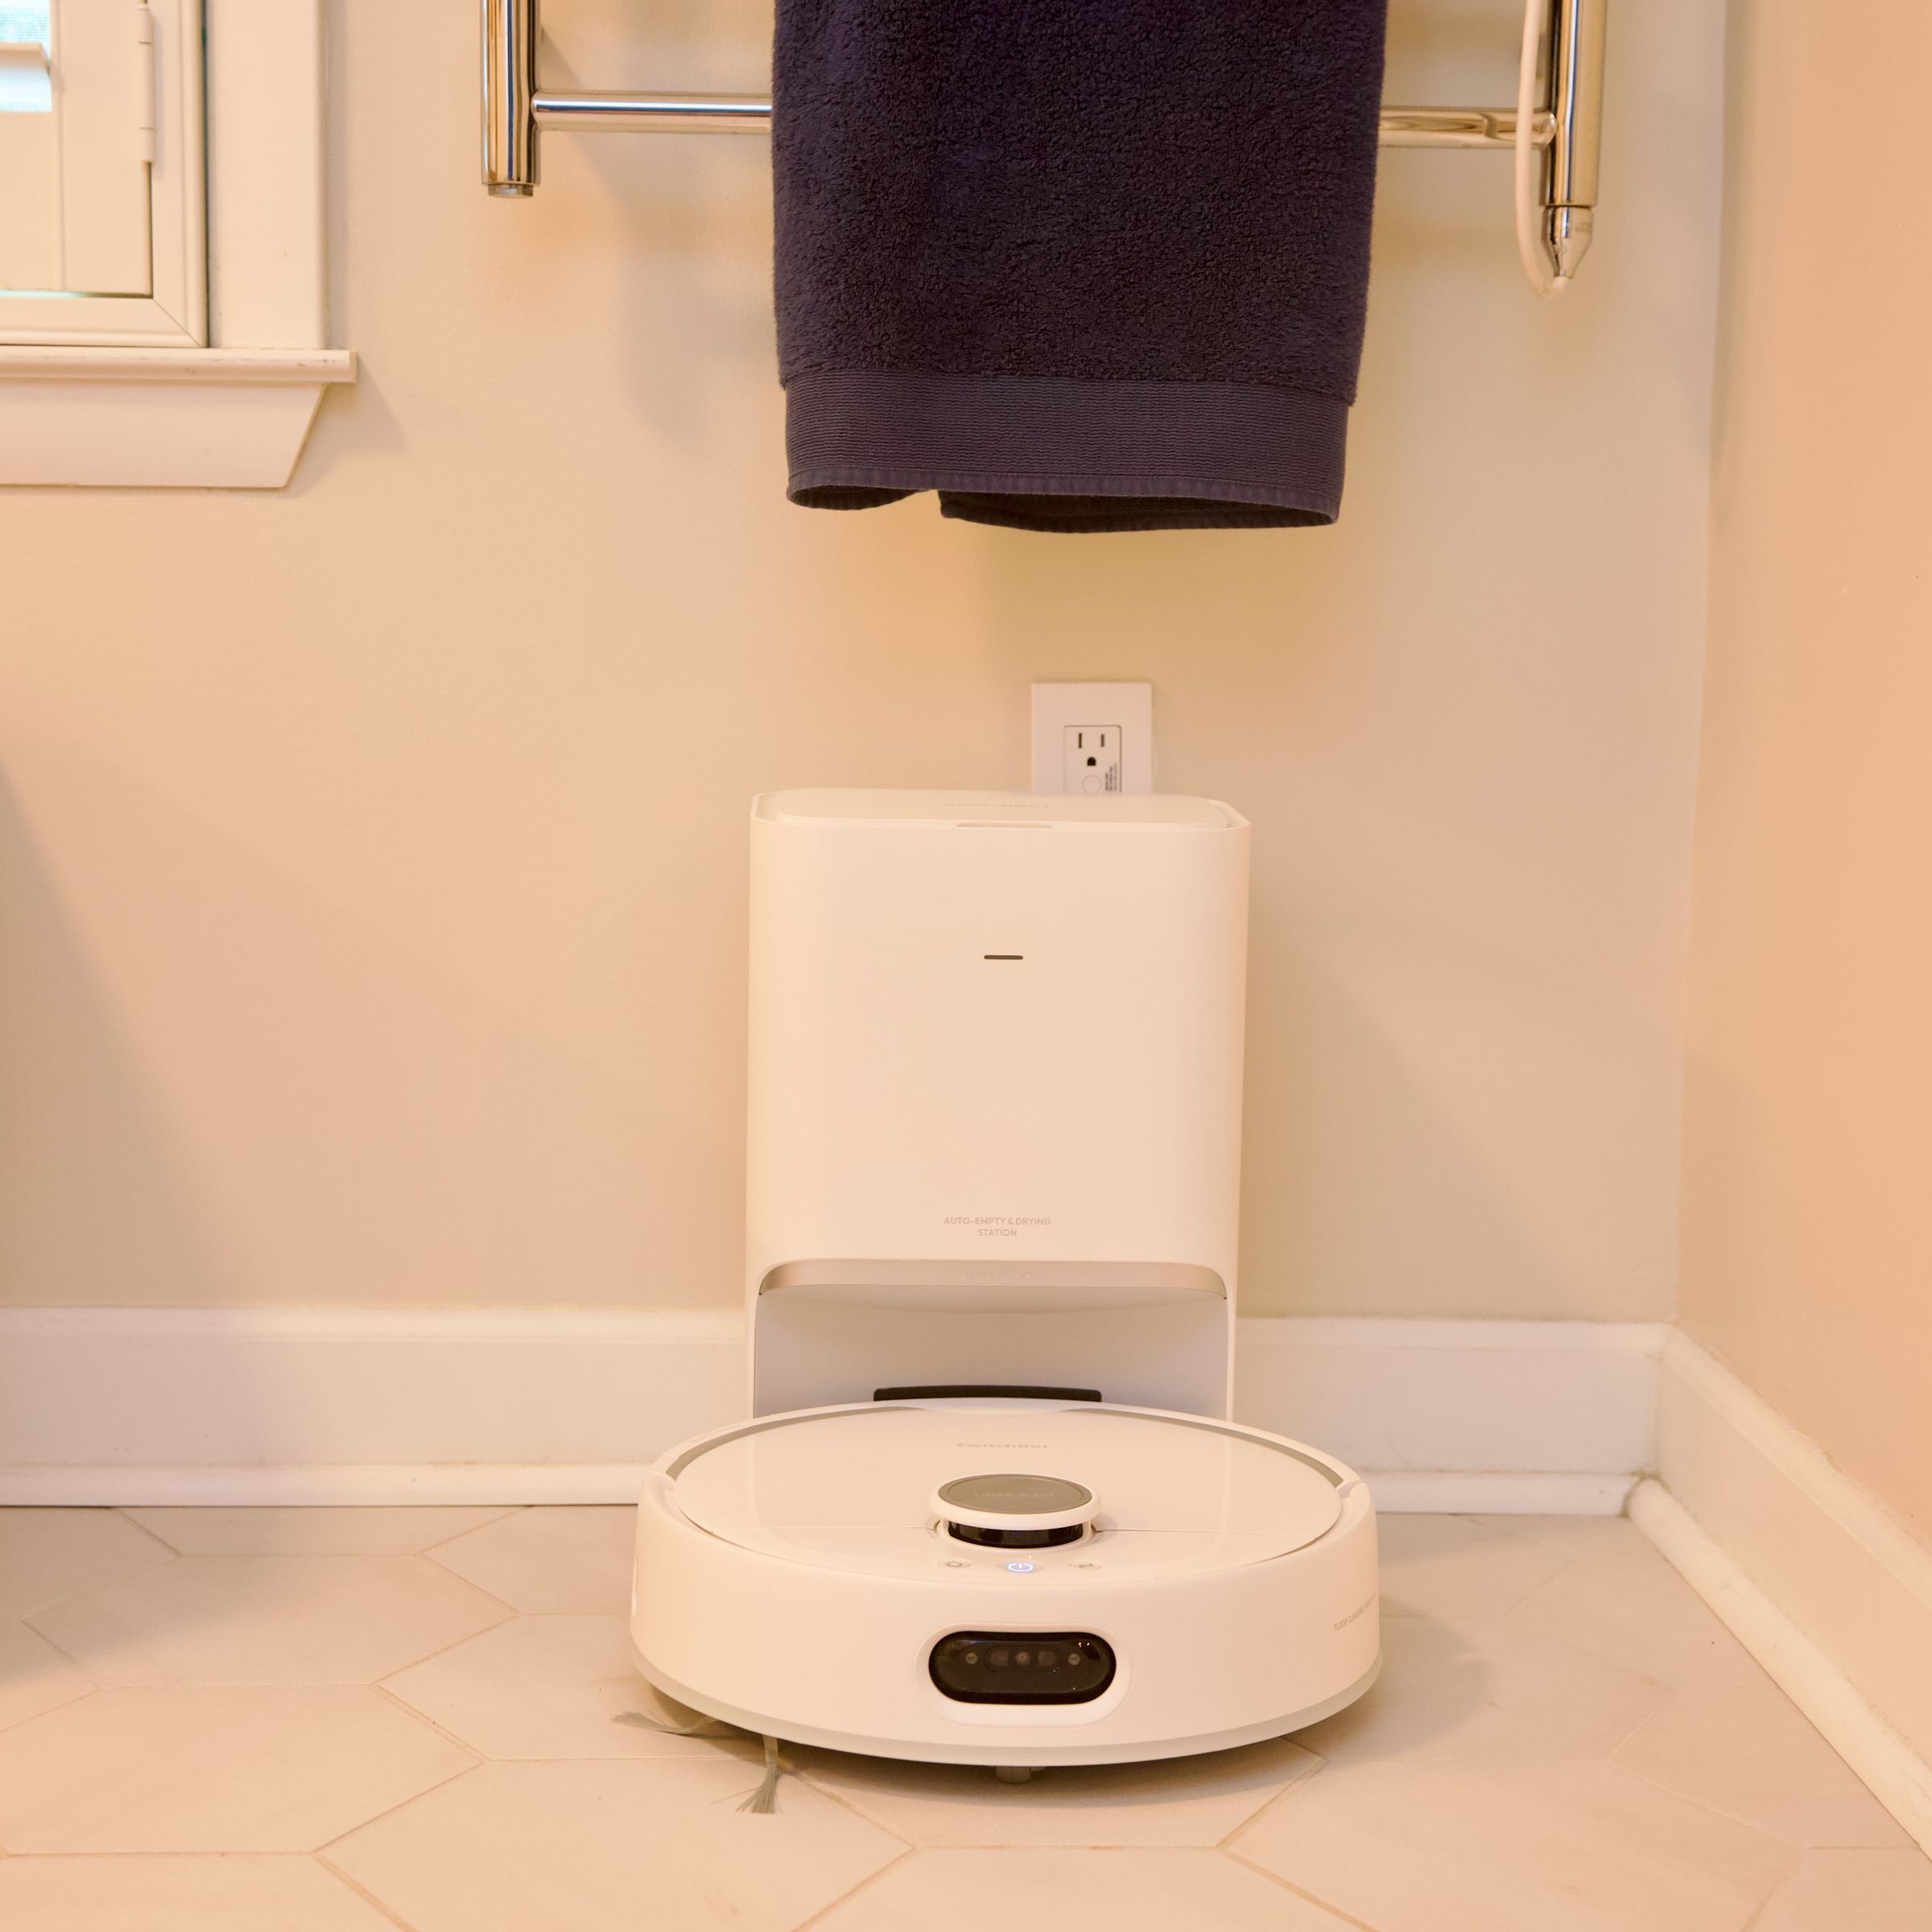 The SwitchBot S10 has two docks, a regular charging station that auto-empties, and a separate water station that can hook into your plumbing.